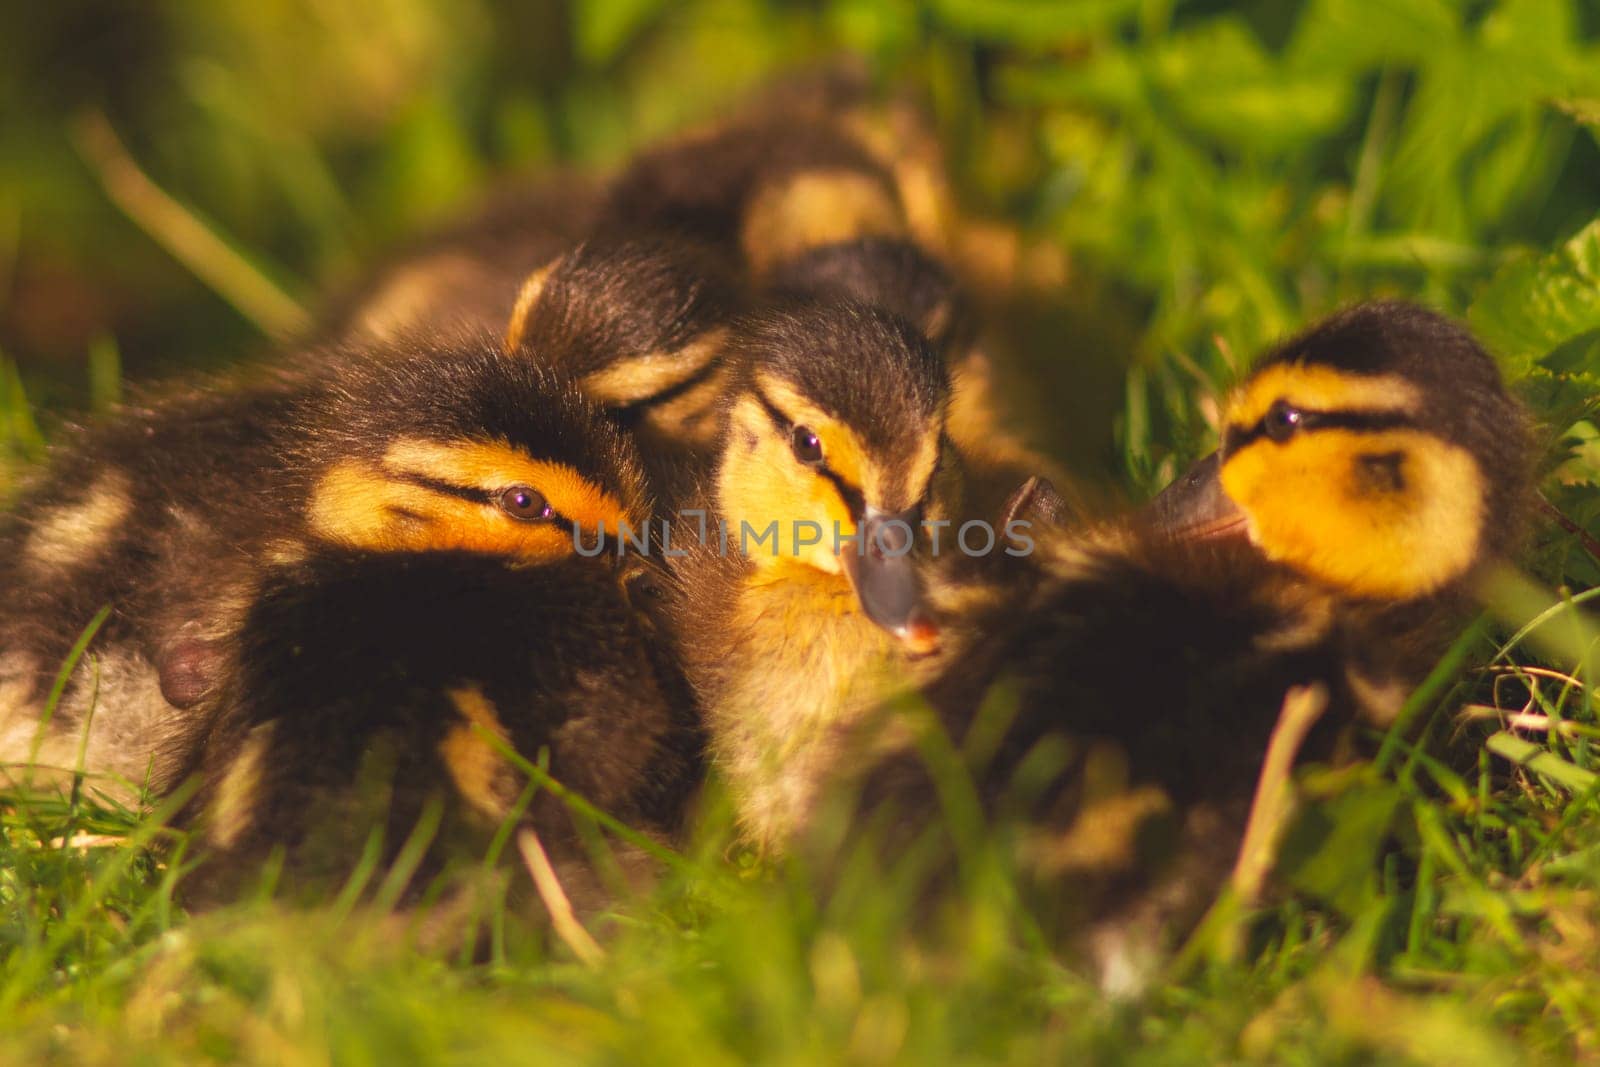 fluffy and small ducklings resting lying next to each other by drakuliren